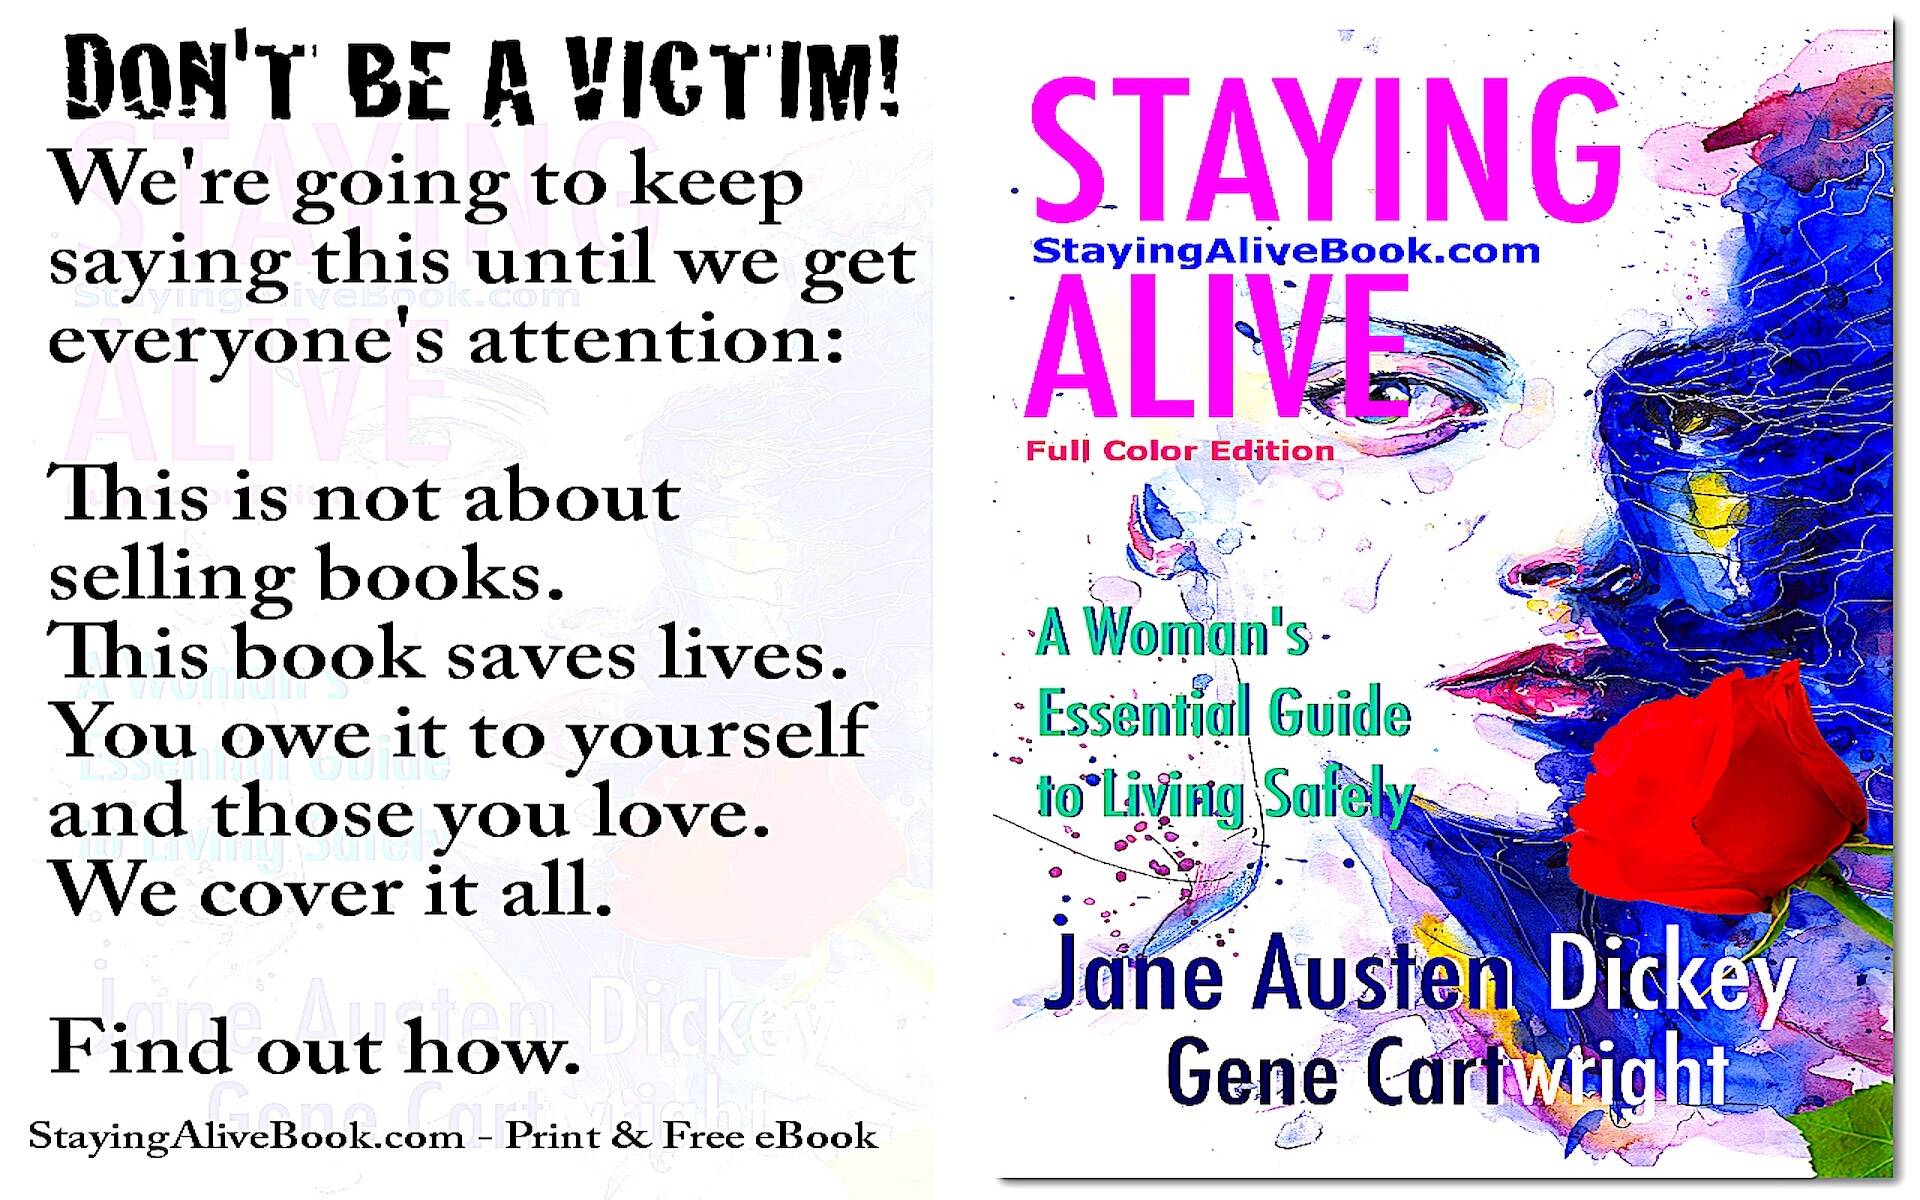 Staying Alive Women's Predator Protection Guide